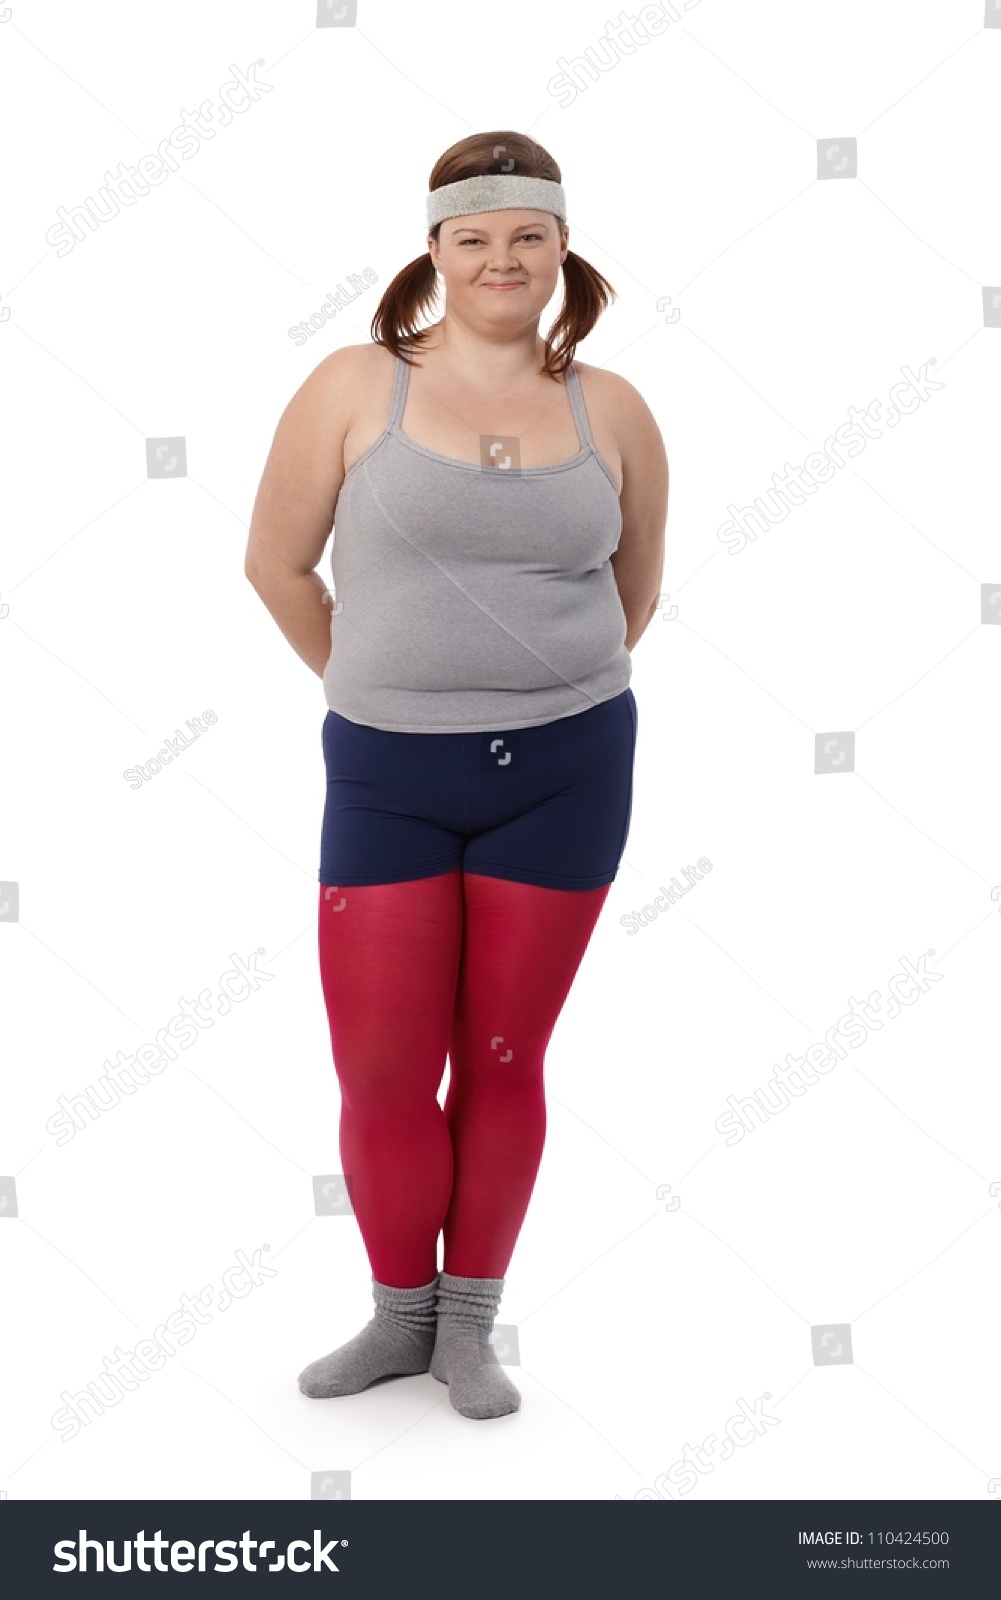 Picture Of Fat Women 6